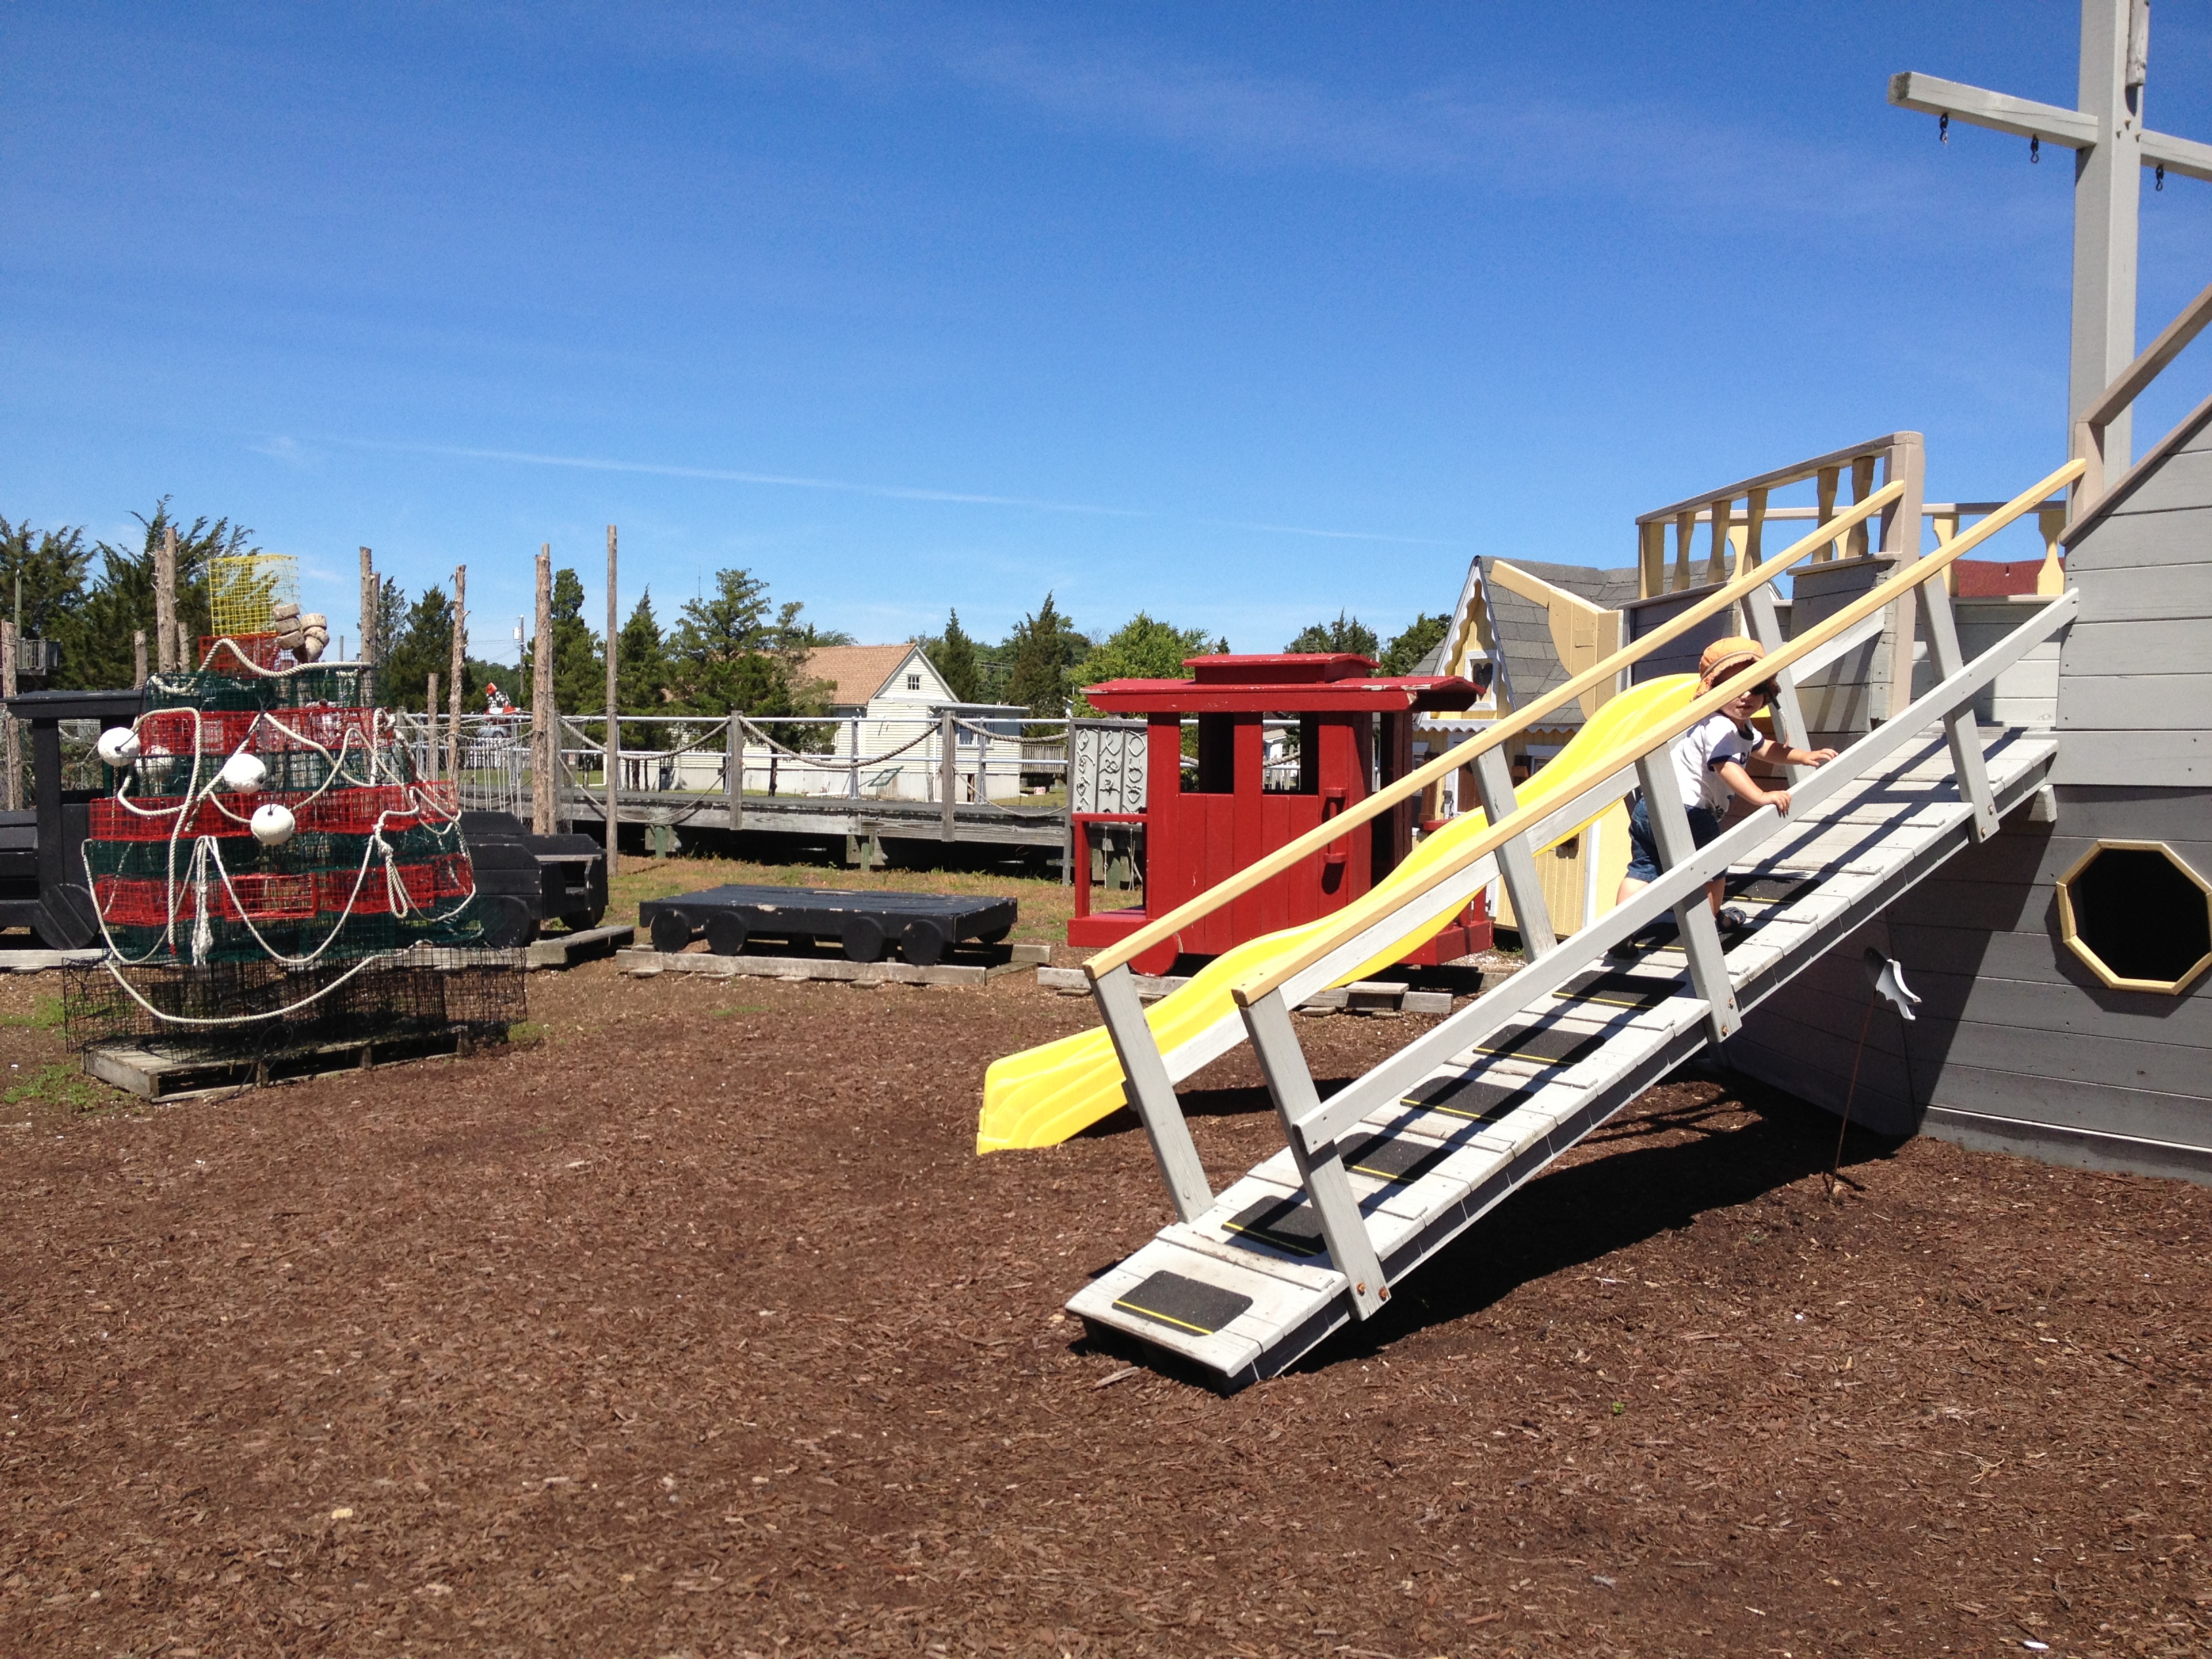 Tuckerton Seaport offers fun and educational programs, exhibits and activities. They also have this really cool playground!